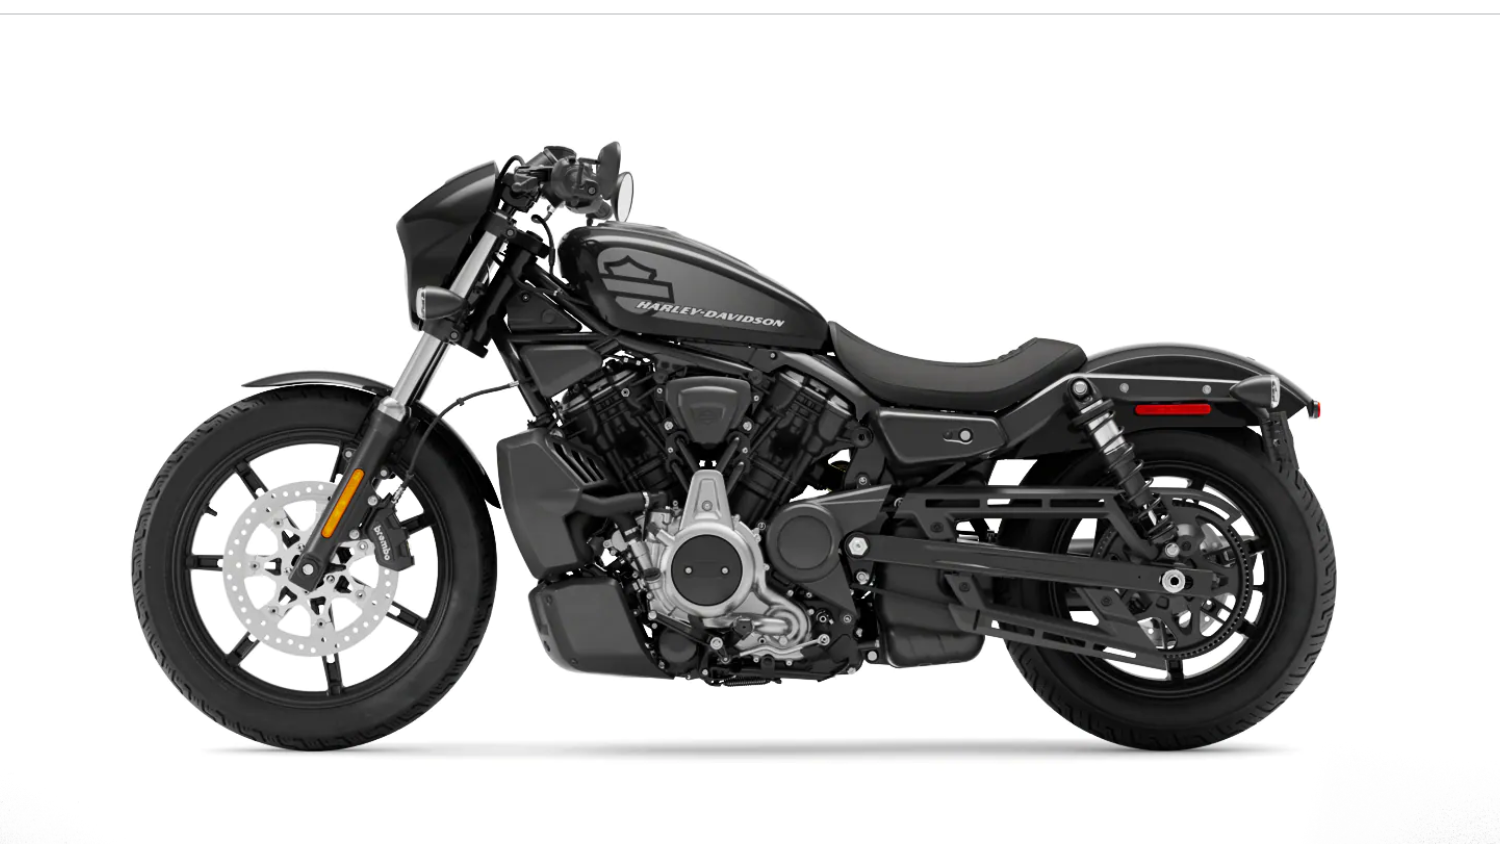 Harley-Davidson Nightster is Back With a Revolution Max Engine